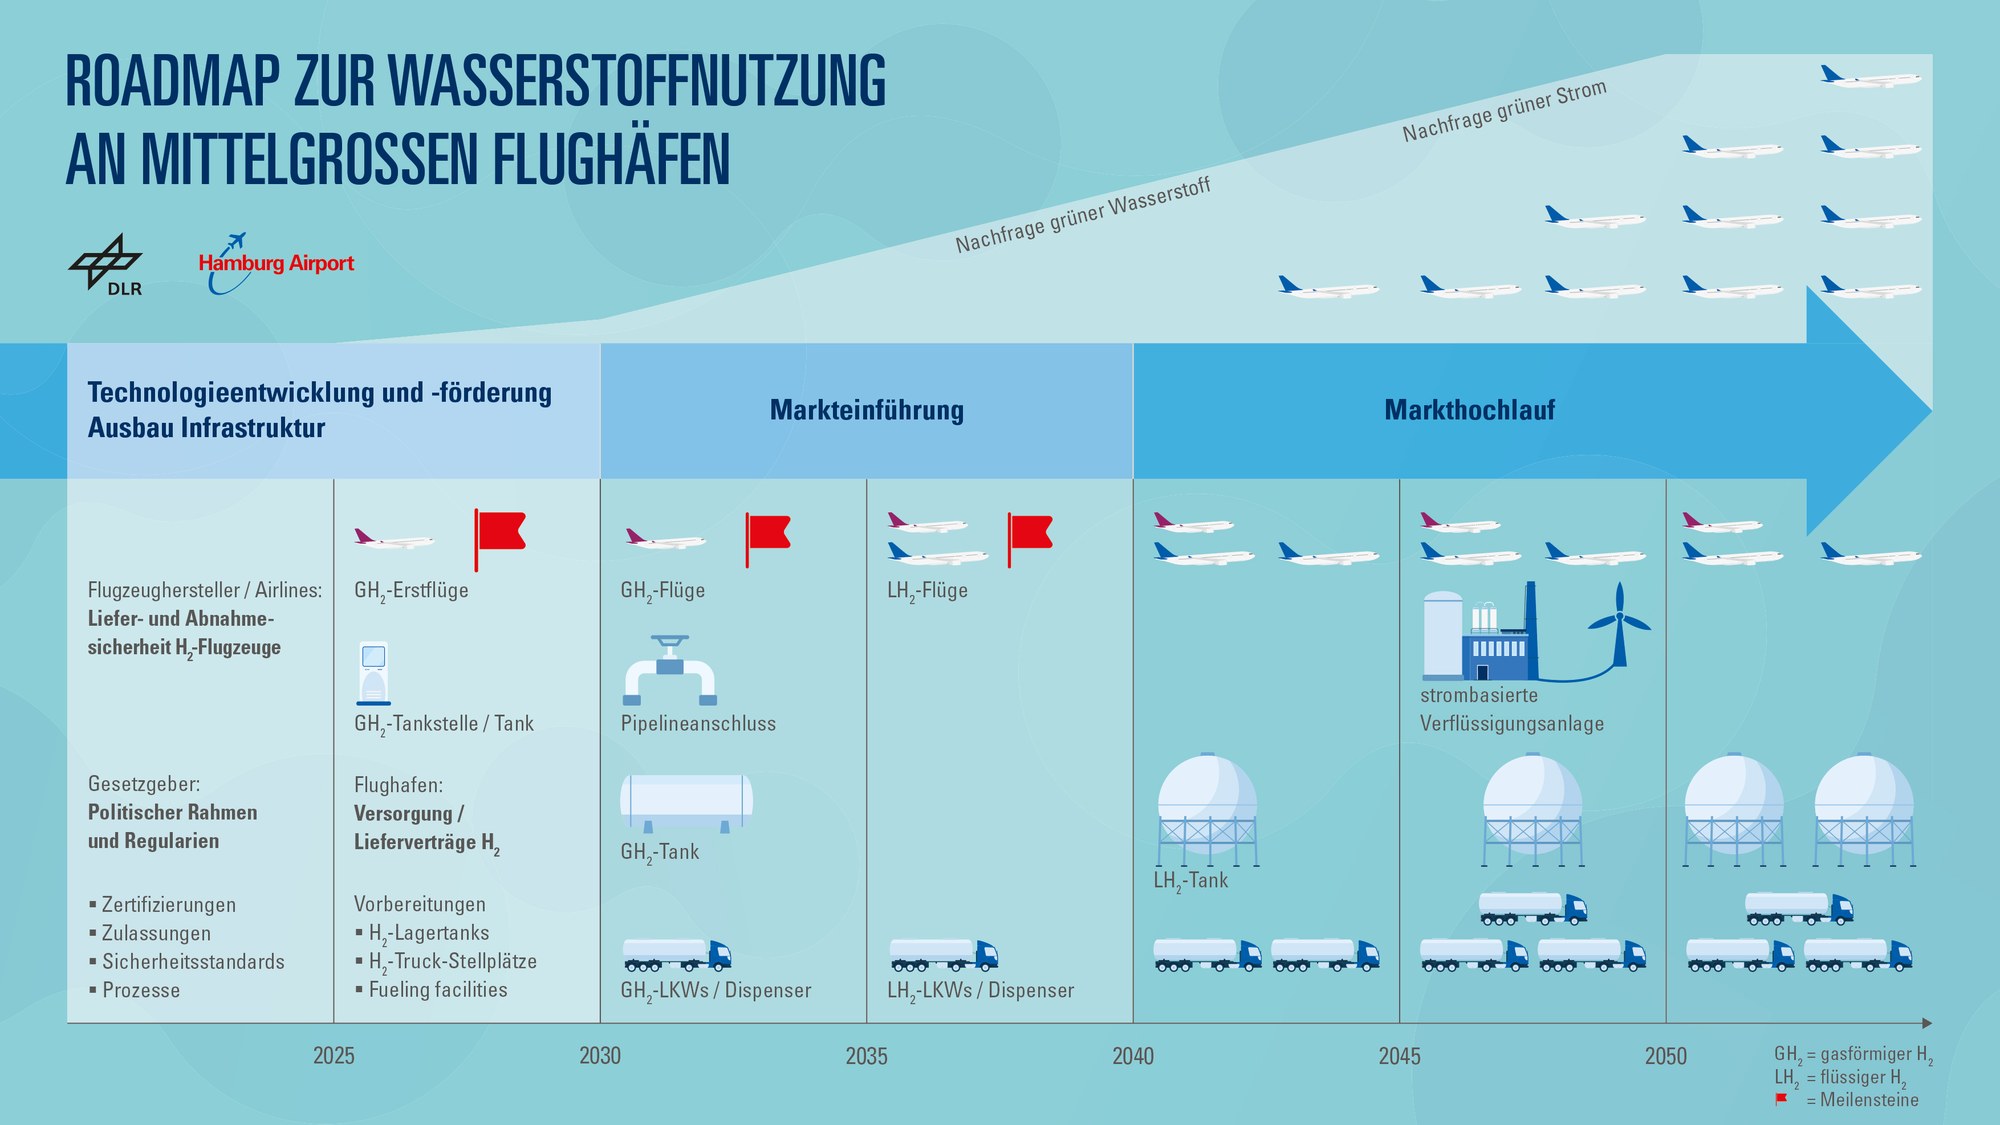 Roadmap for the introduction of hydrogen at medium-sized airports